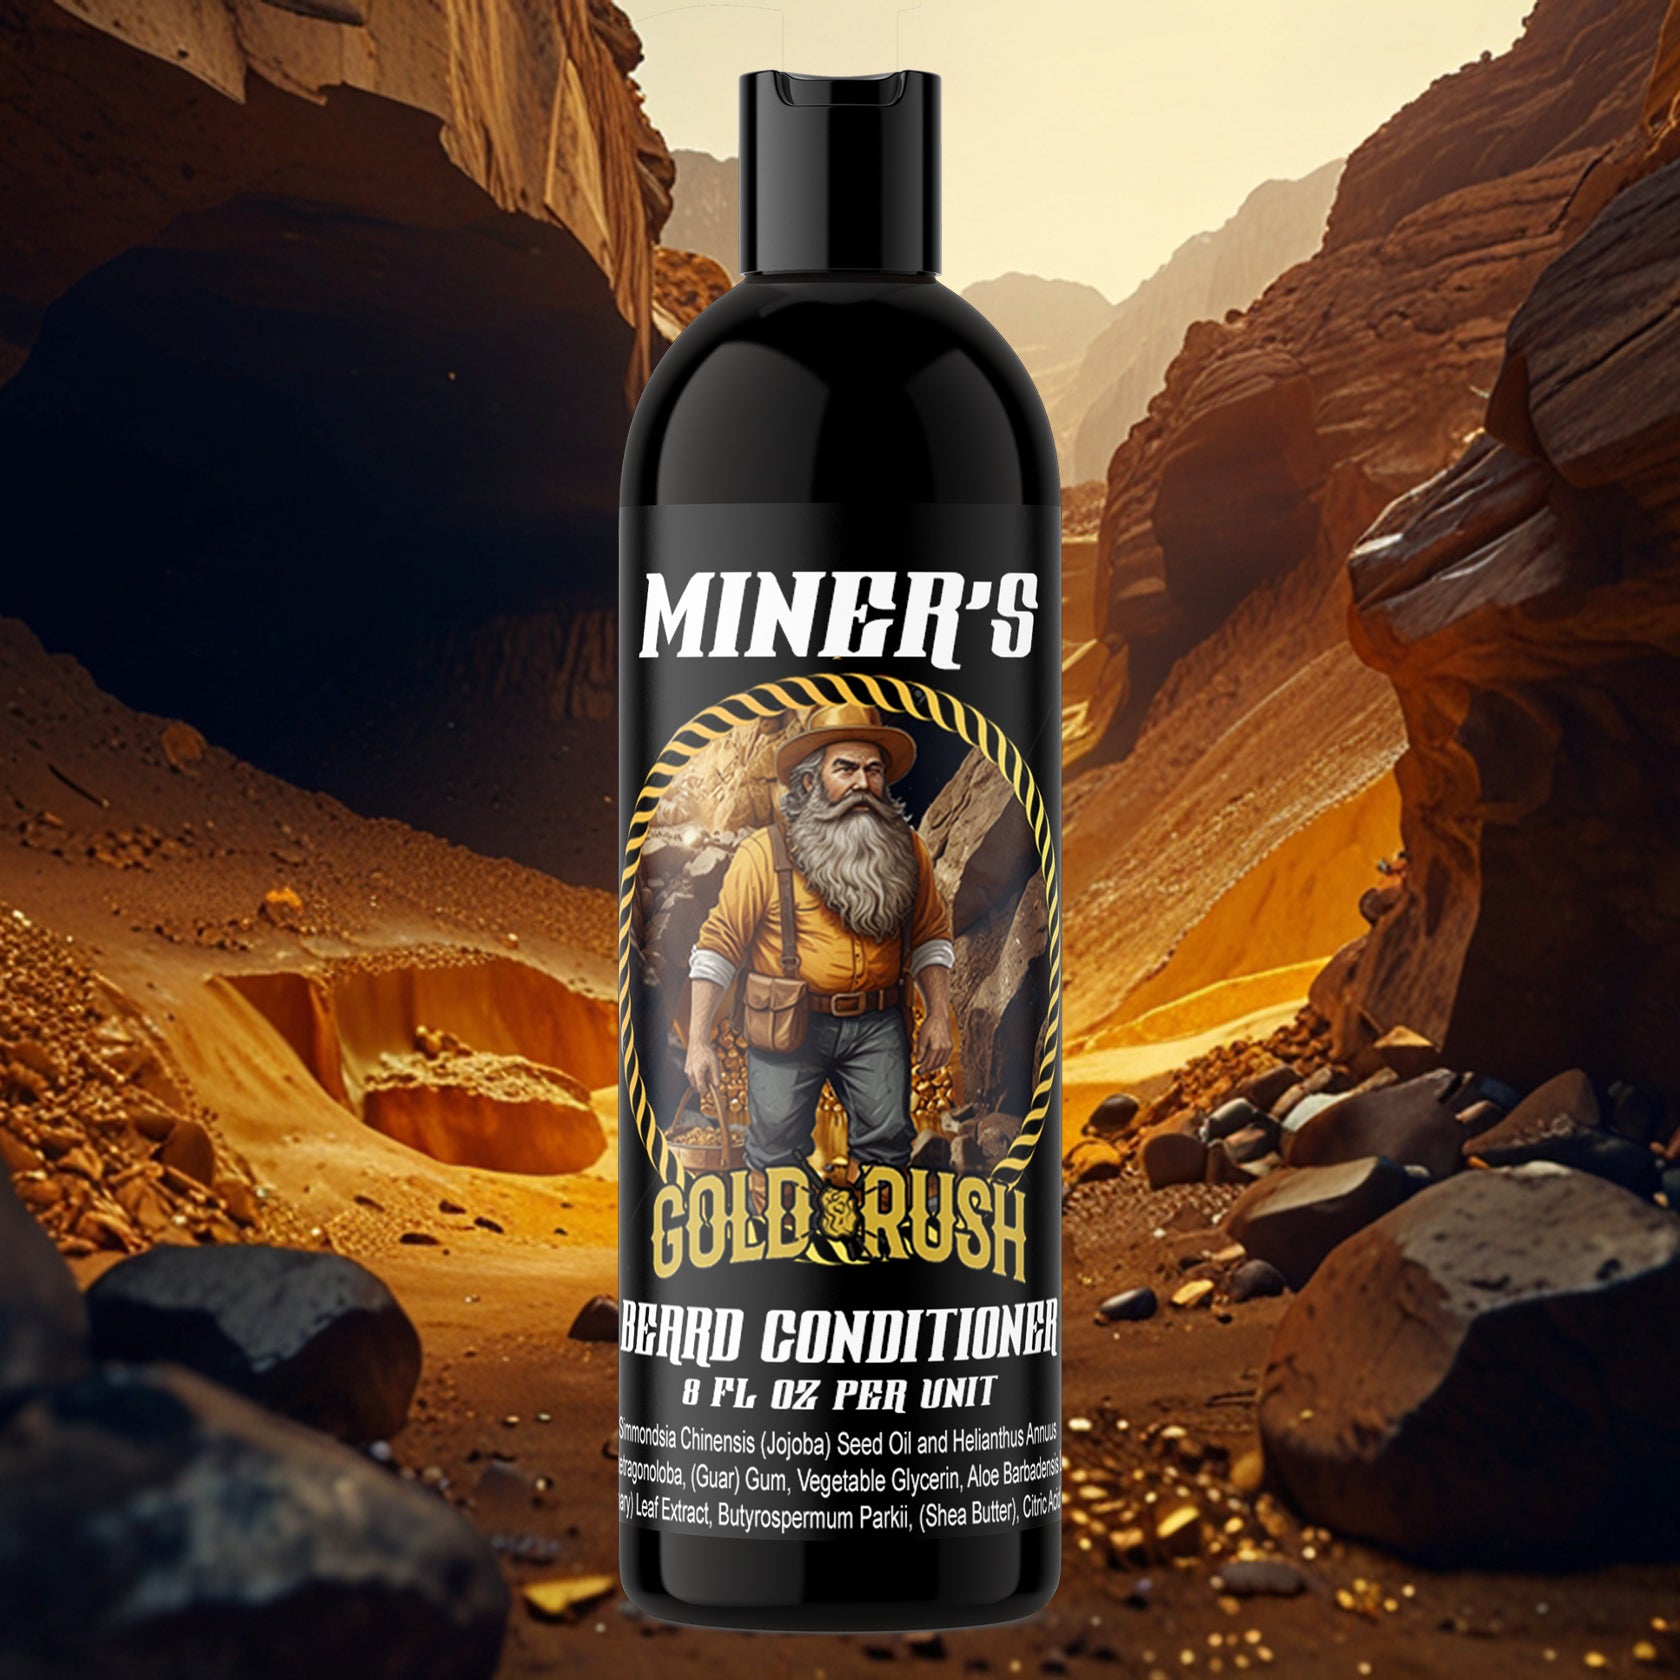 Gold Rush - Beard Conditioner - Golden Amber, Smooth Leather, Vetiver & Smoky Cedarwood